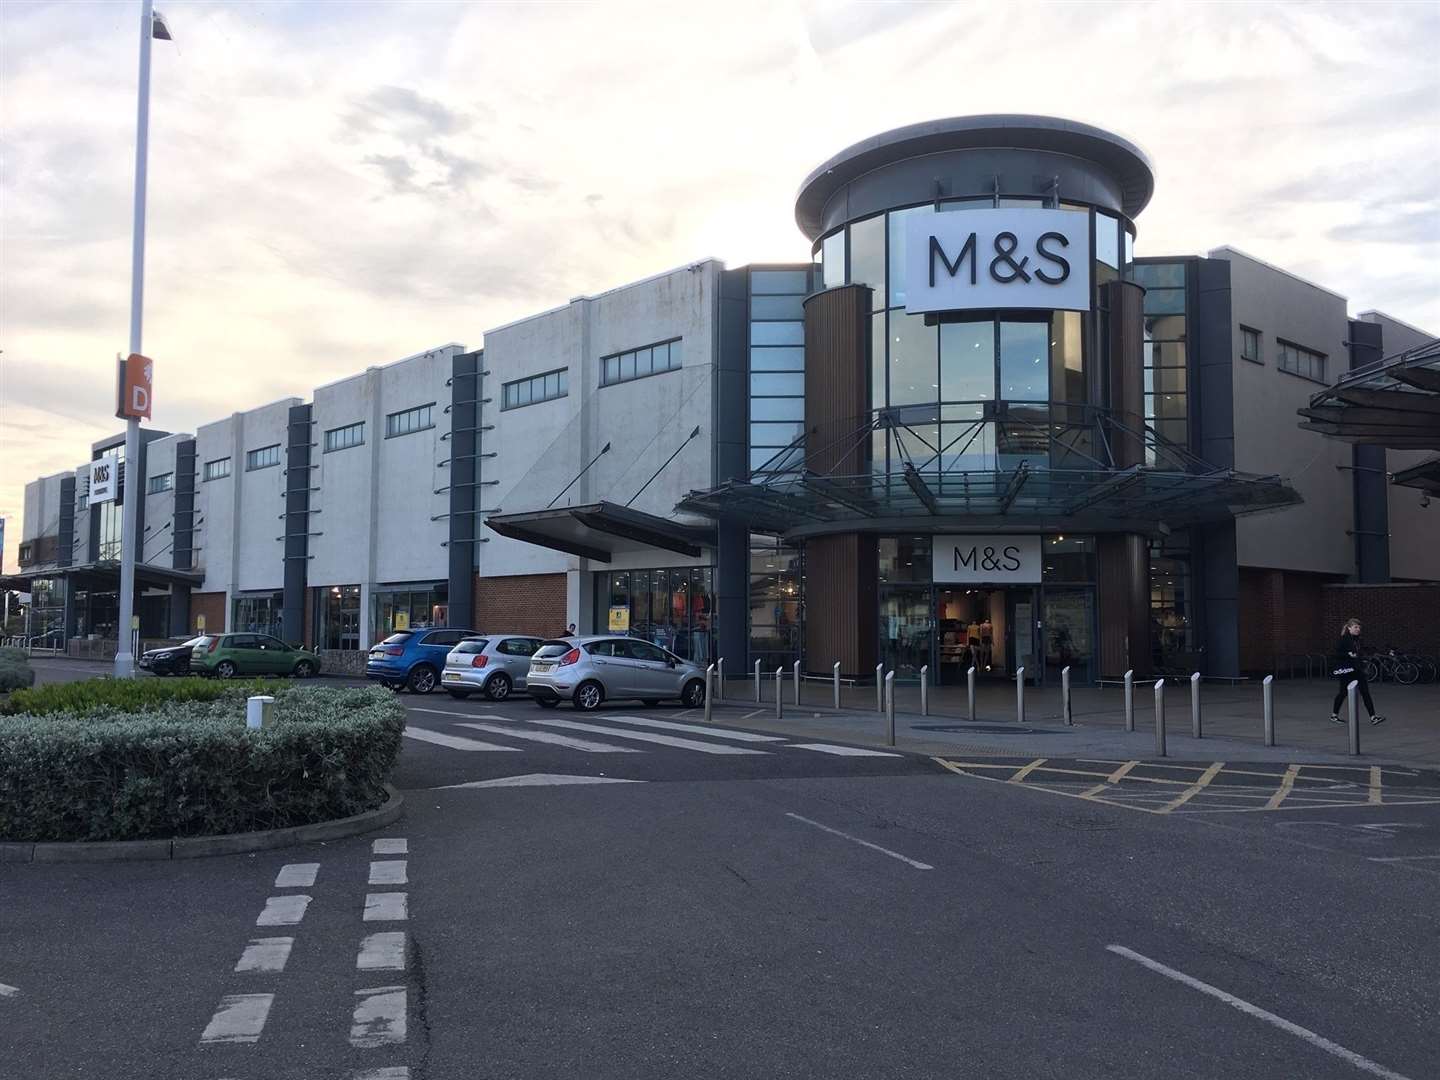 Westwood Cross shopping centre